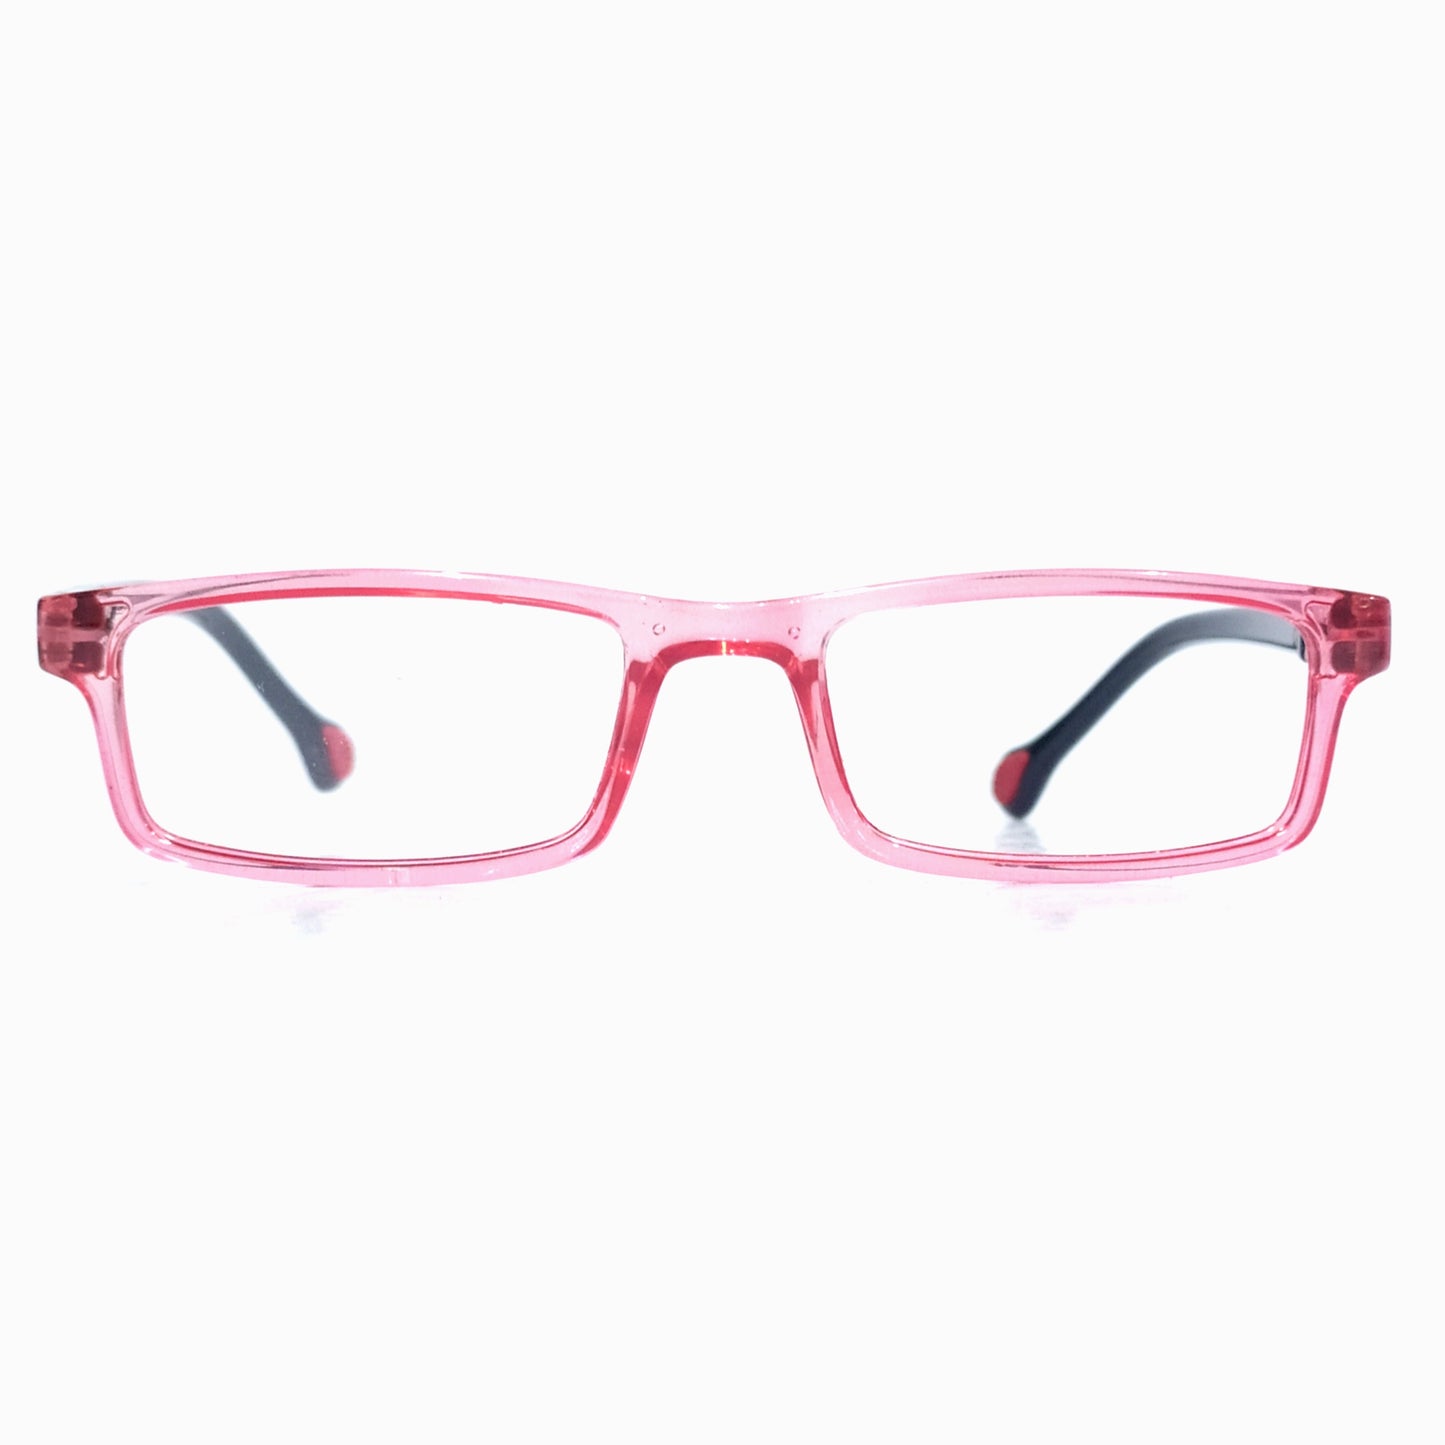 Red Kids Spectacle Frames for 2-3 Years Old